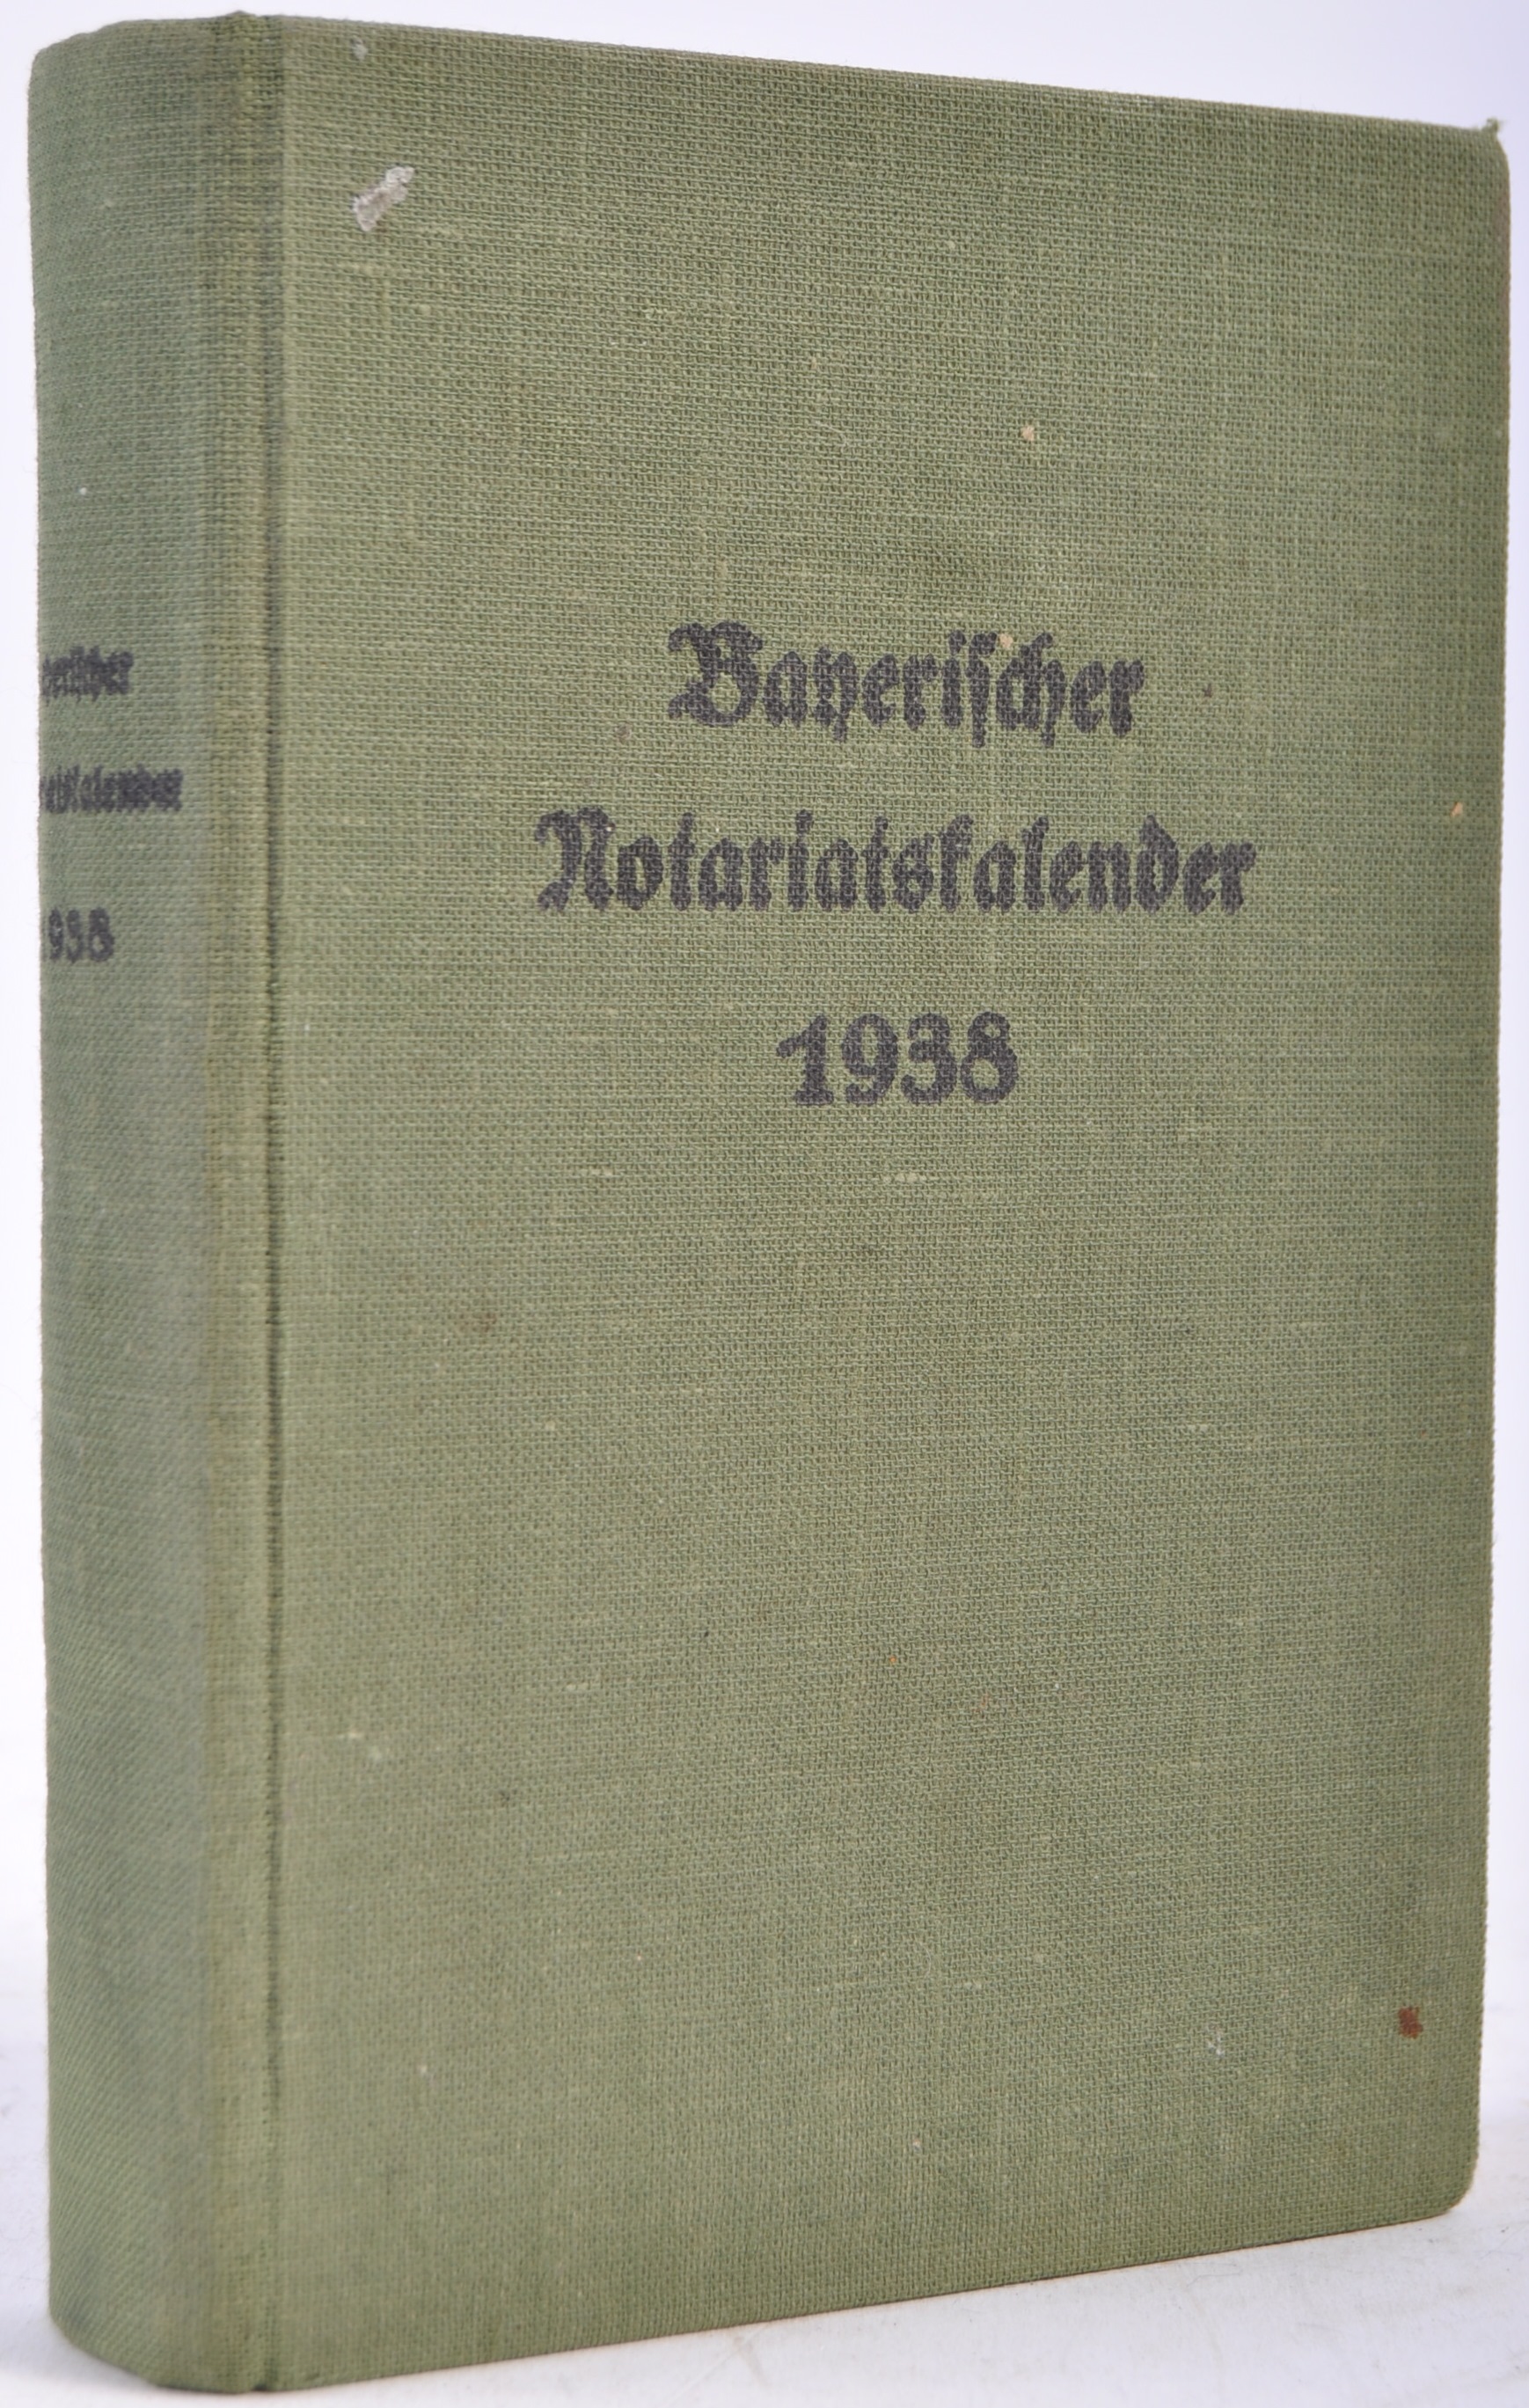 PRE-WWII GERMAN BOOK - LISTING HIGH RANKING REICH LEADERS